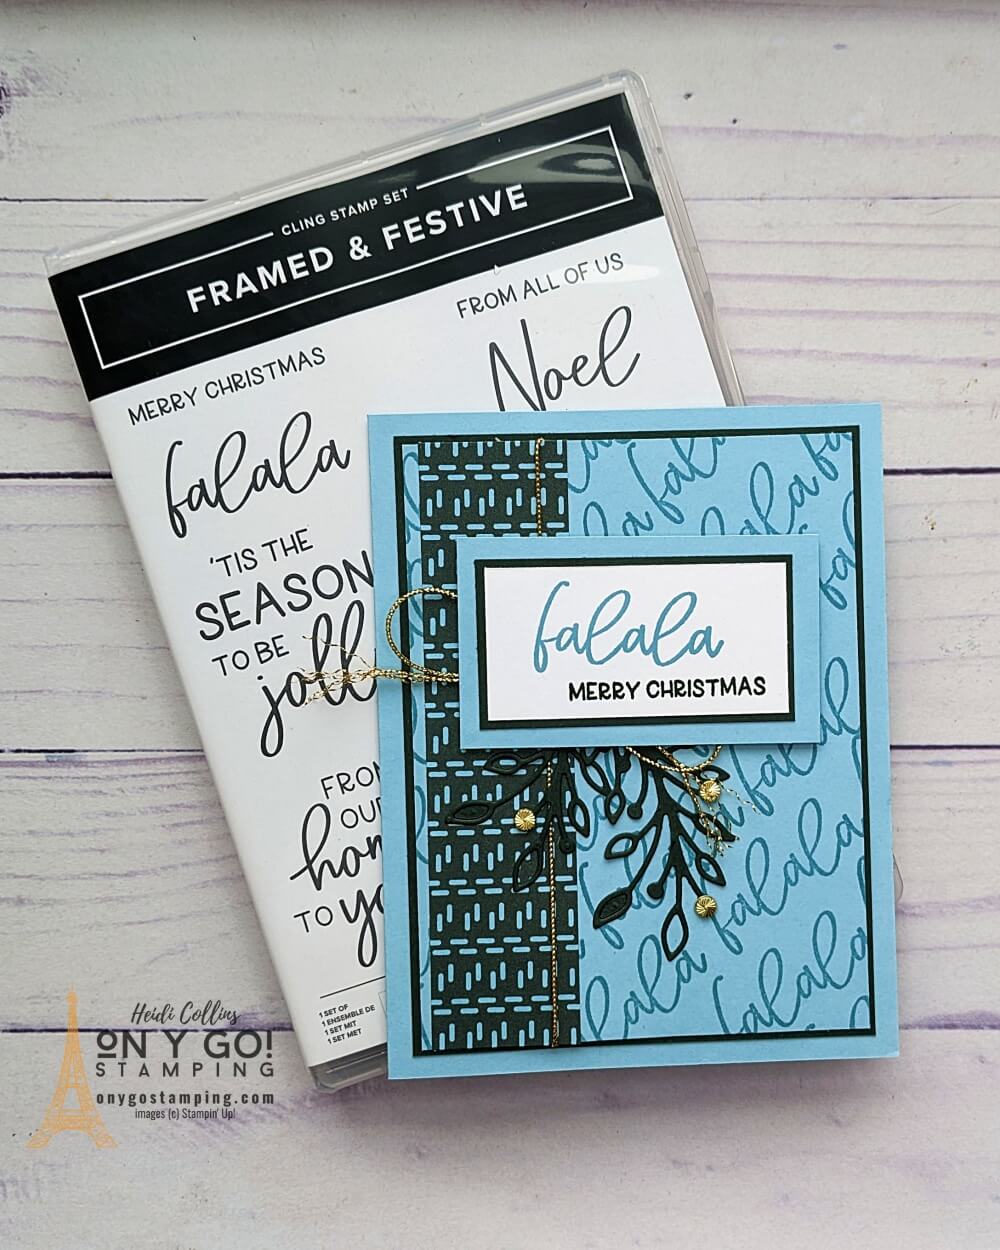 Create a striking Christmas Card with the Framed & Festive stamp set from Stampin' Up! Includes a video tutorial of how to make this card.